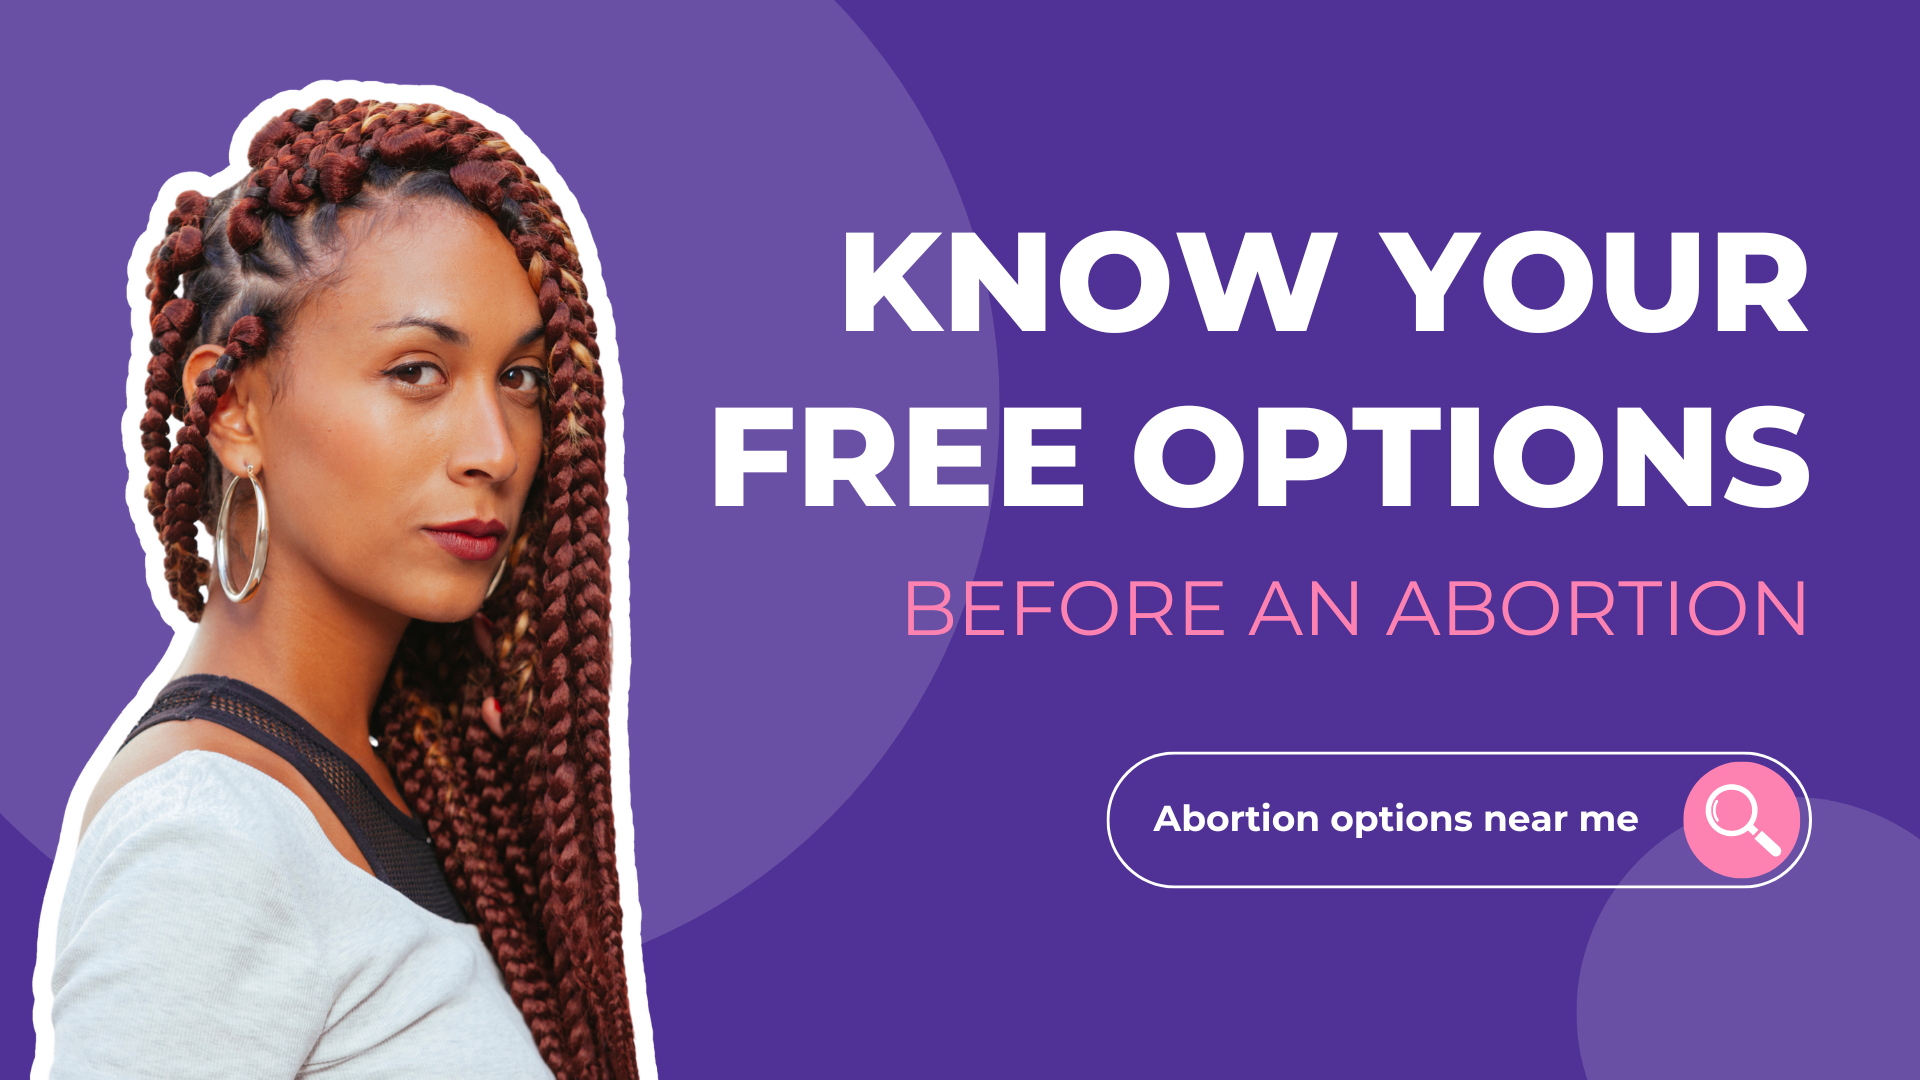 Searching for Michigan abortion clinics near you? Know your free options first with Problem Pregnancy Center or related pregnancy centers who specialize in helping women with unplanned pregnancies. 